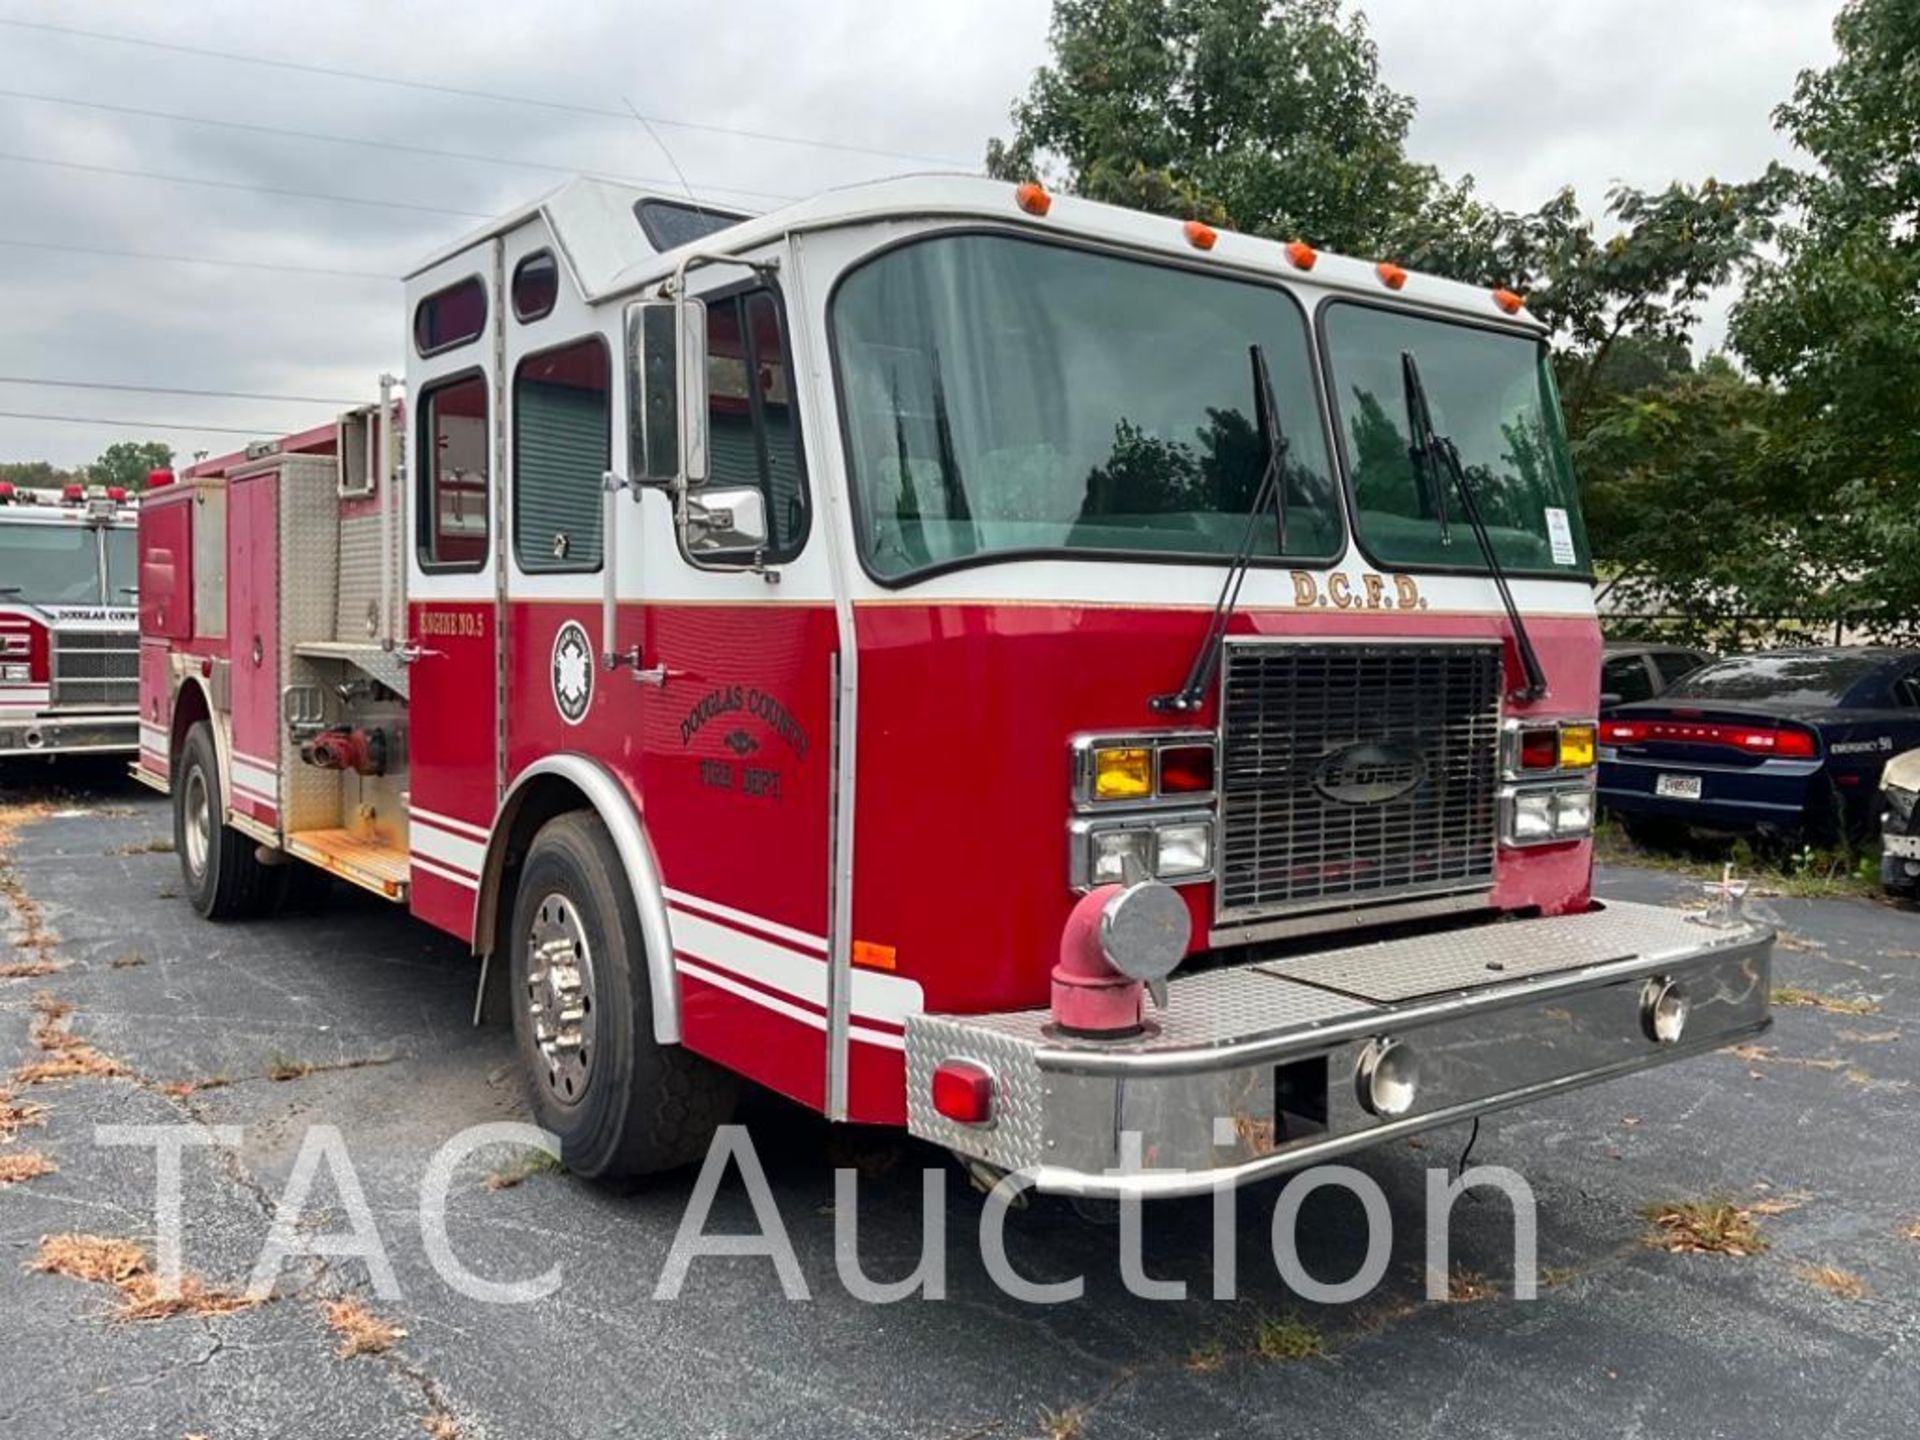 1997 E-One Fire Truck - Image 10 of 60